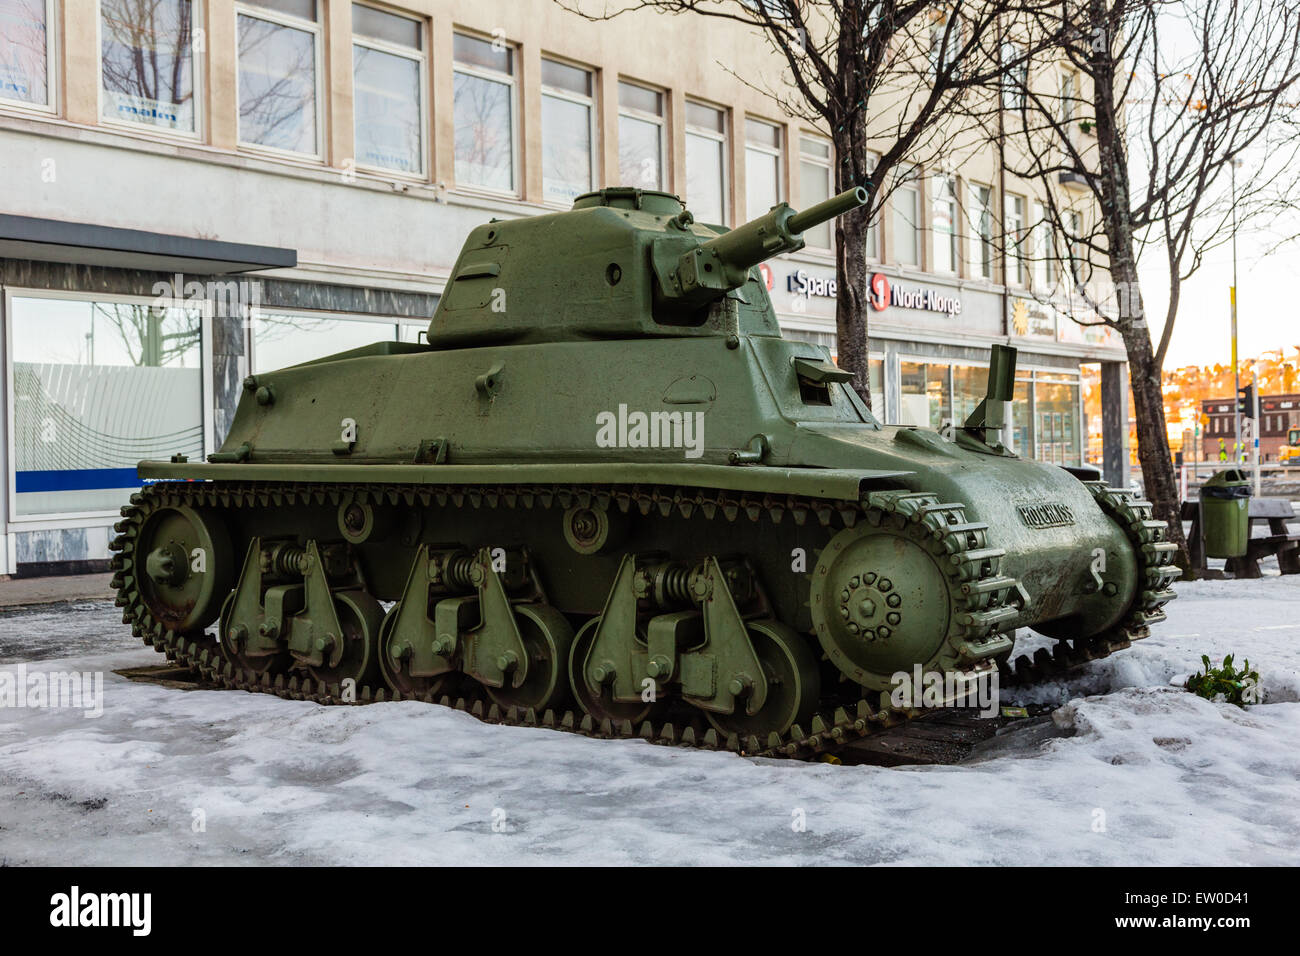 The Hotchkiss H35 tank outside the war museum in Narvik, Norway Stock Photo